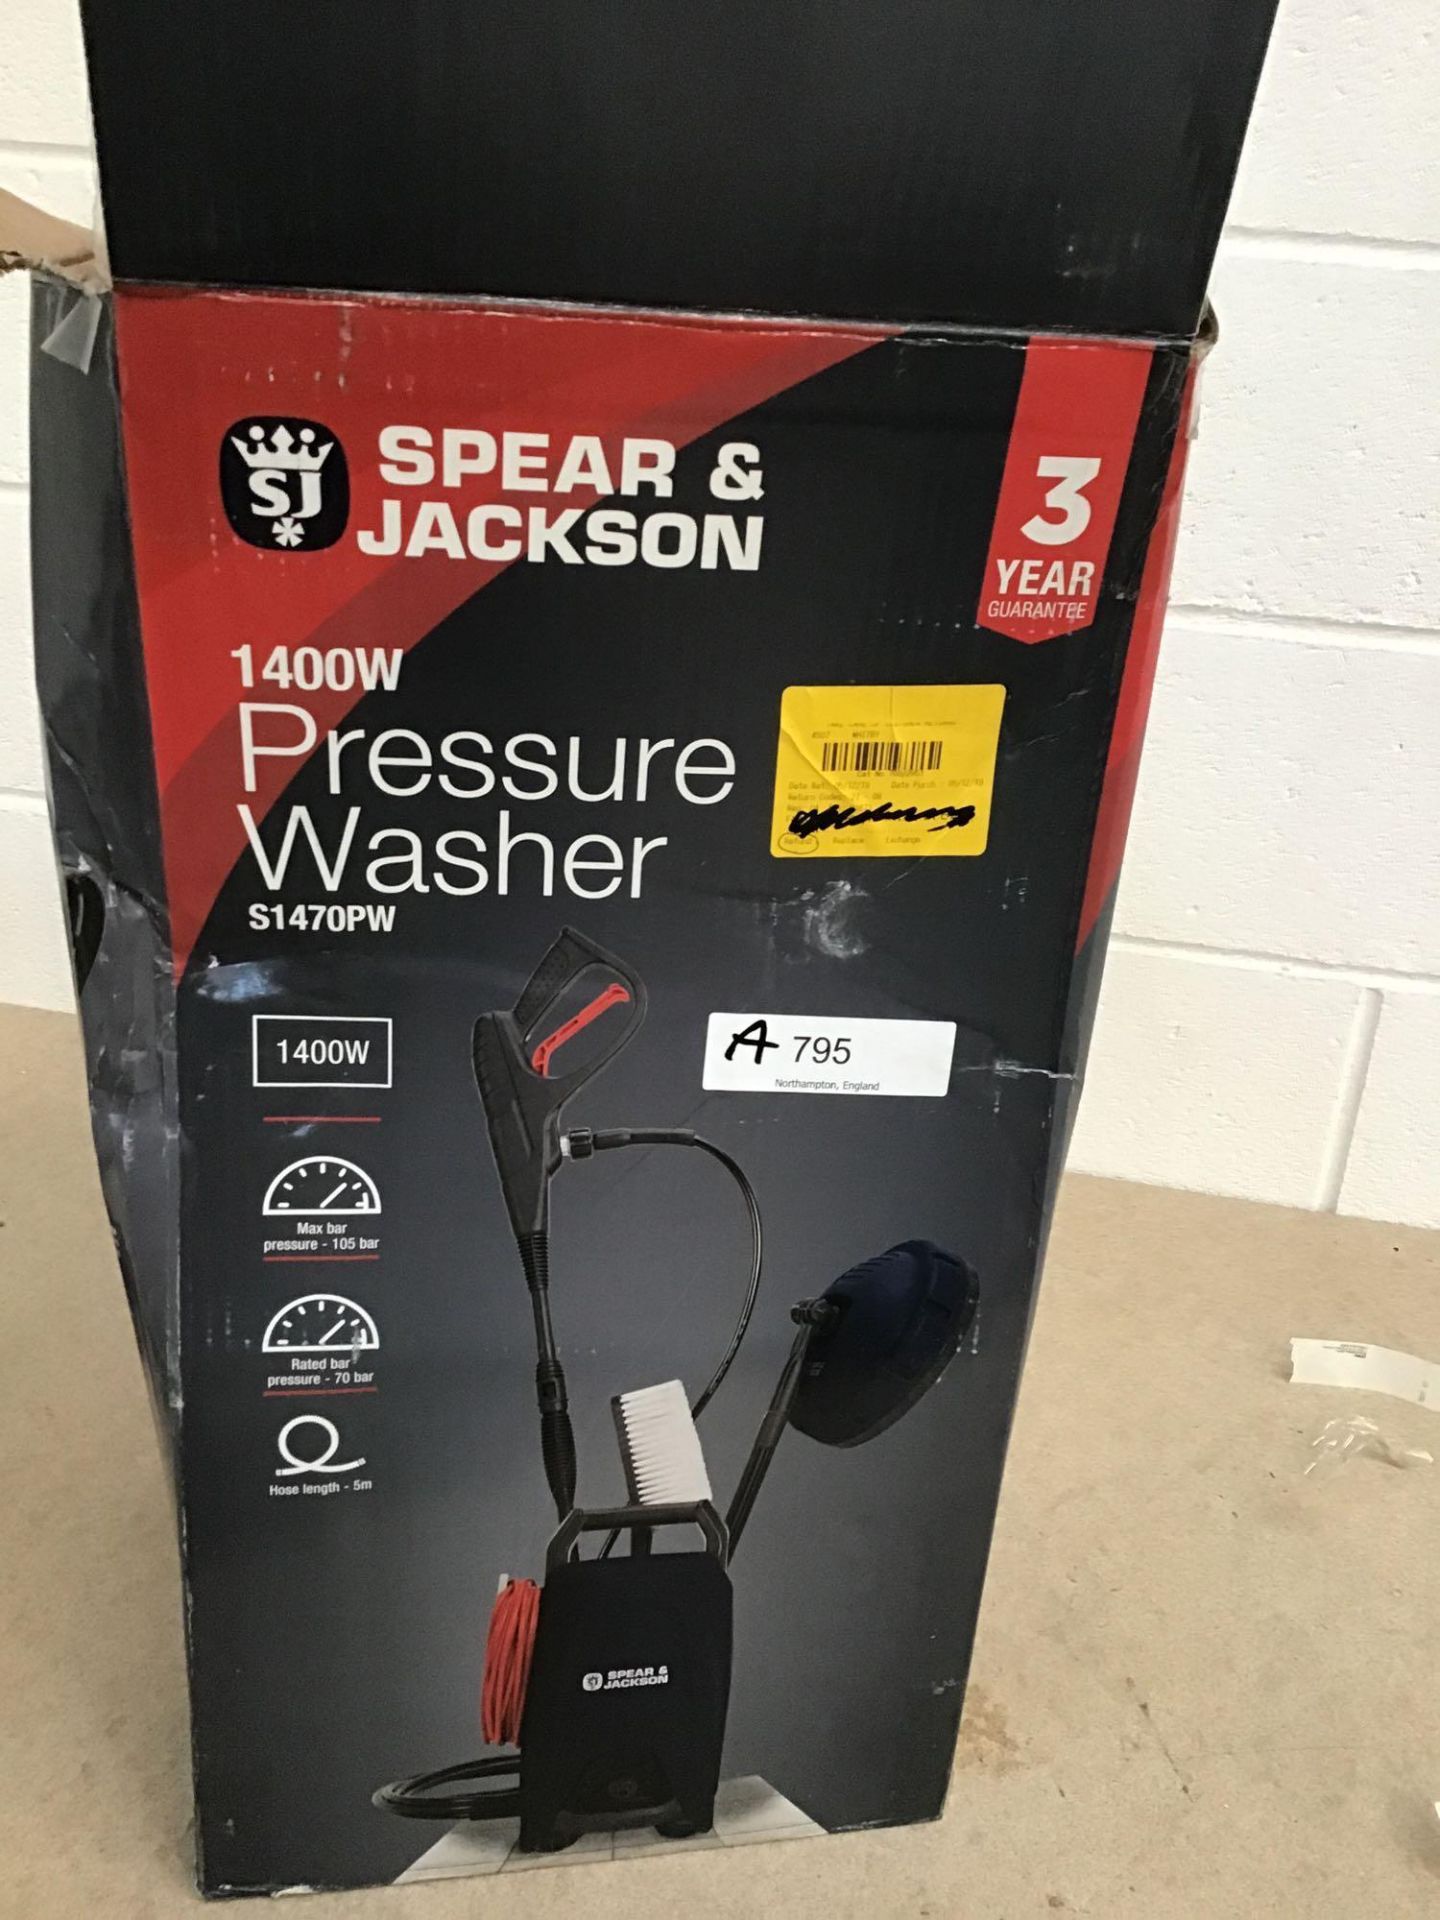 Spear & Jackson Pressure Washer - 1400W - £70.00 RRP - Image 2 of 6